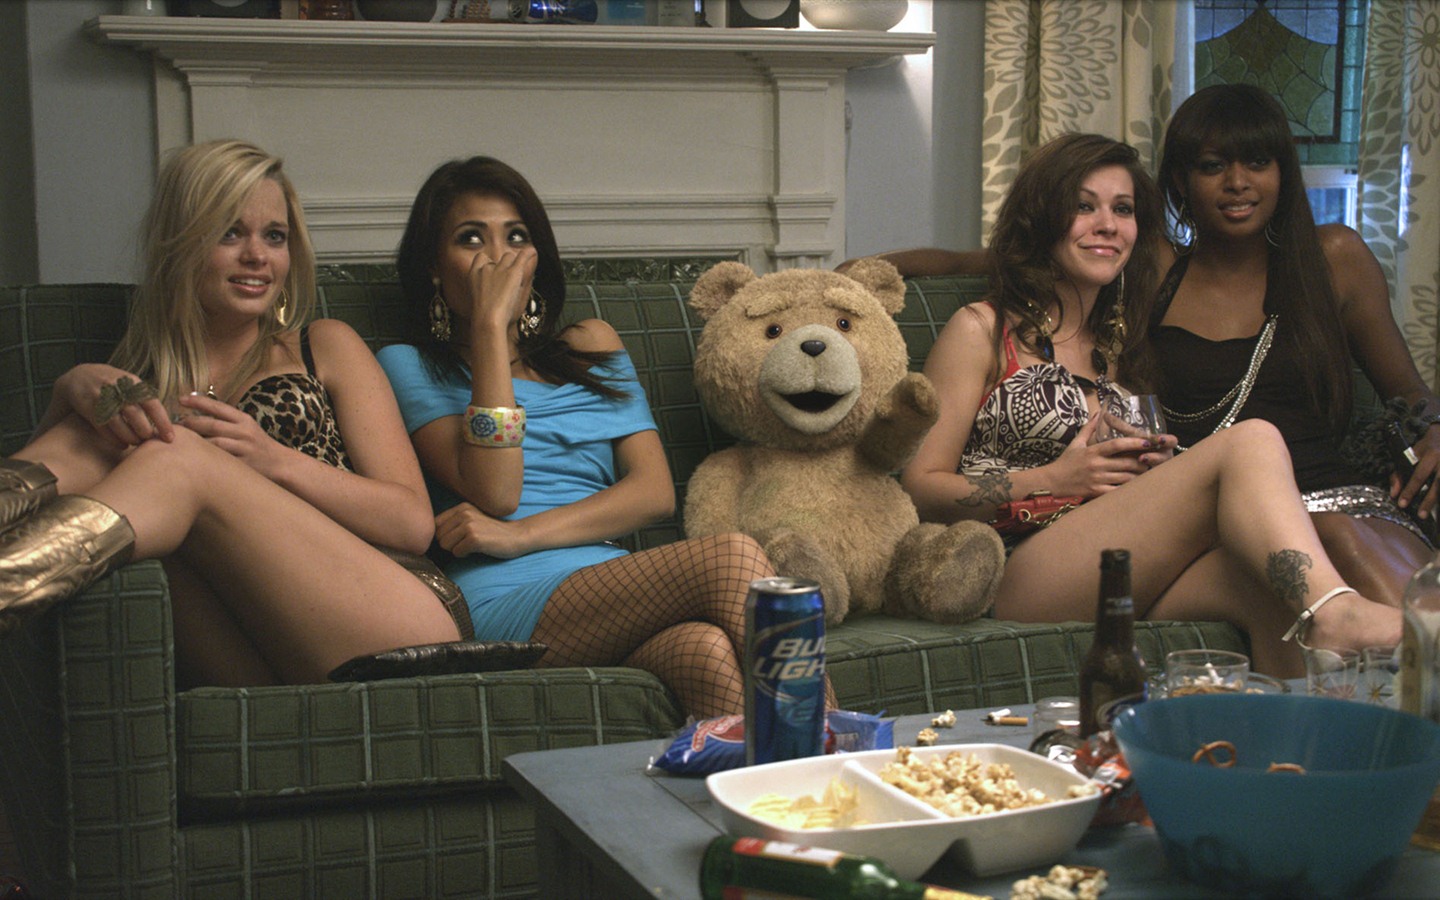 Ted 2012 HD movie wallpapers #6 - 1440x900